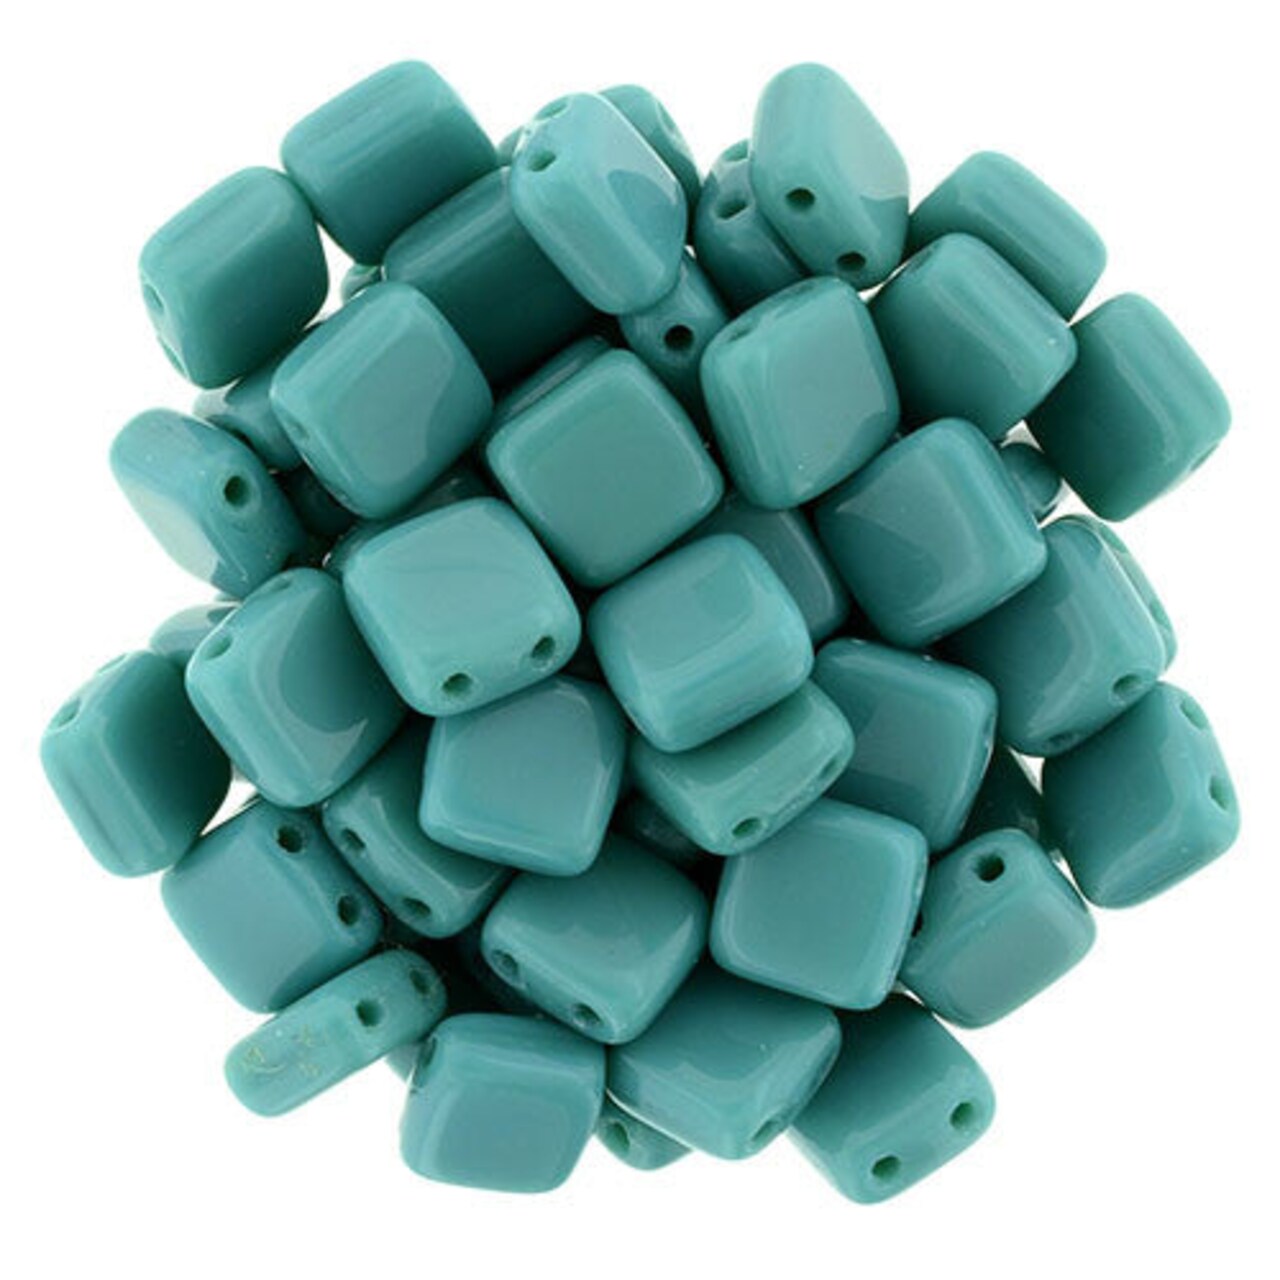 Czechmate 6mm Square Glass Czech Two Hole Tile Bead, Persian Turquoise